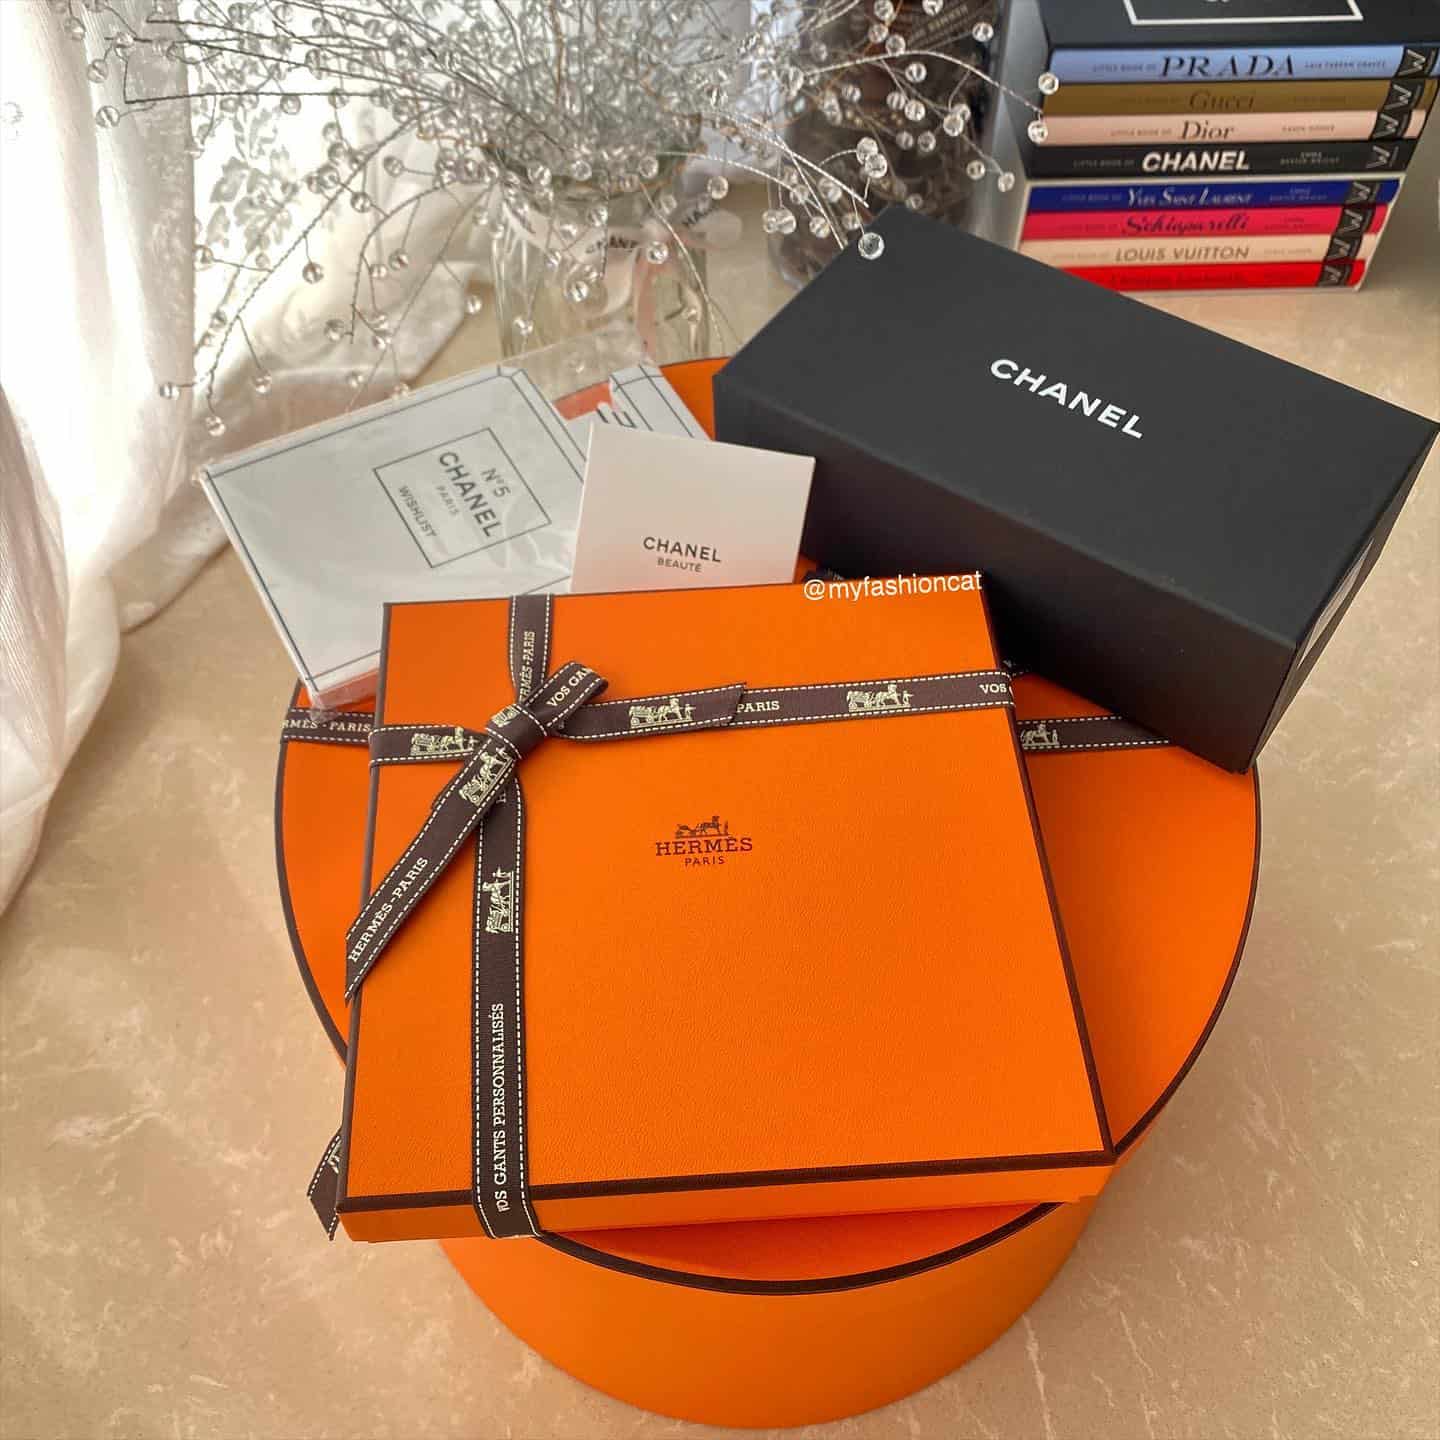 Hermes and Chanel boxes